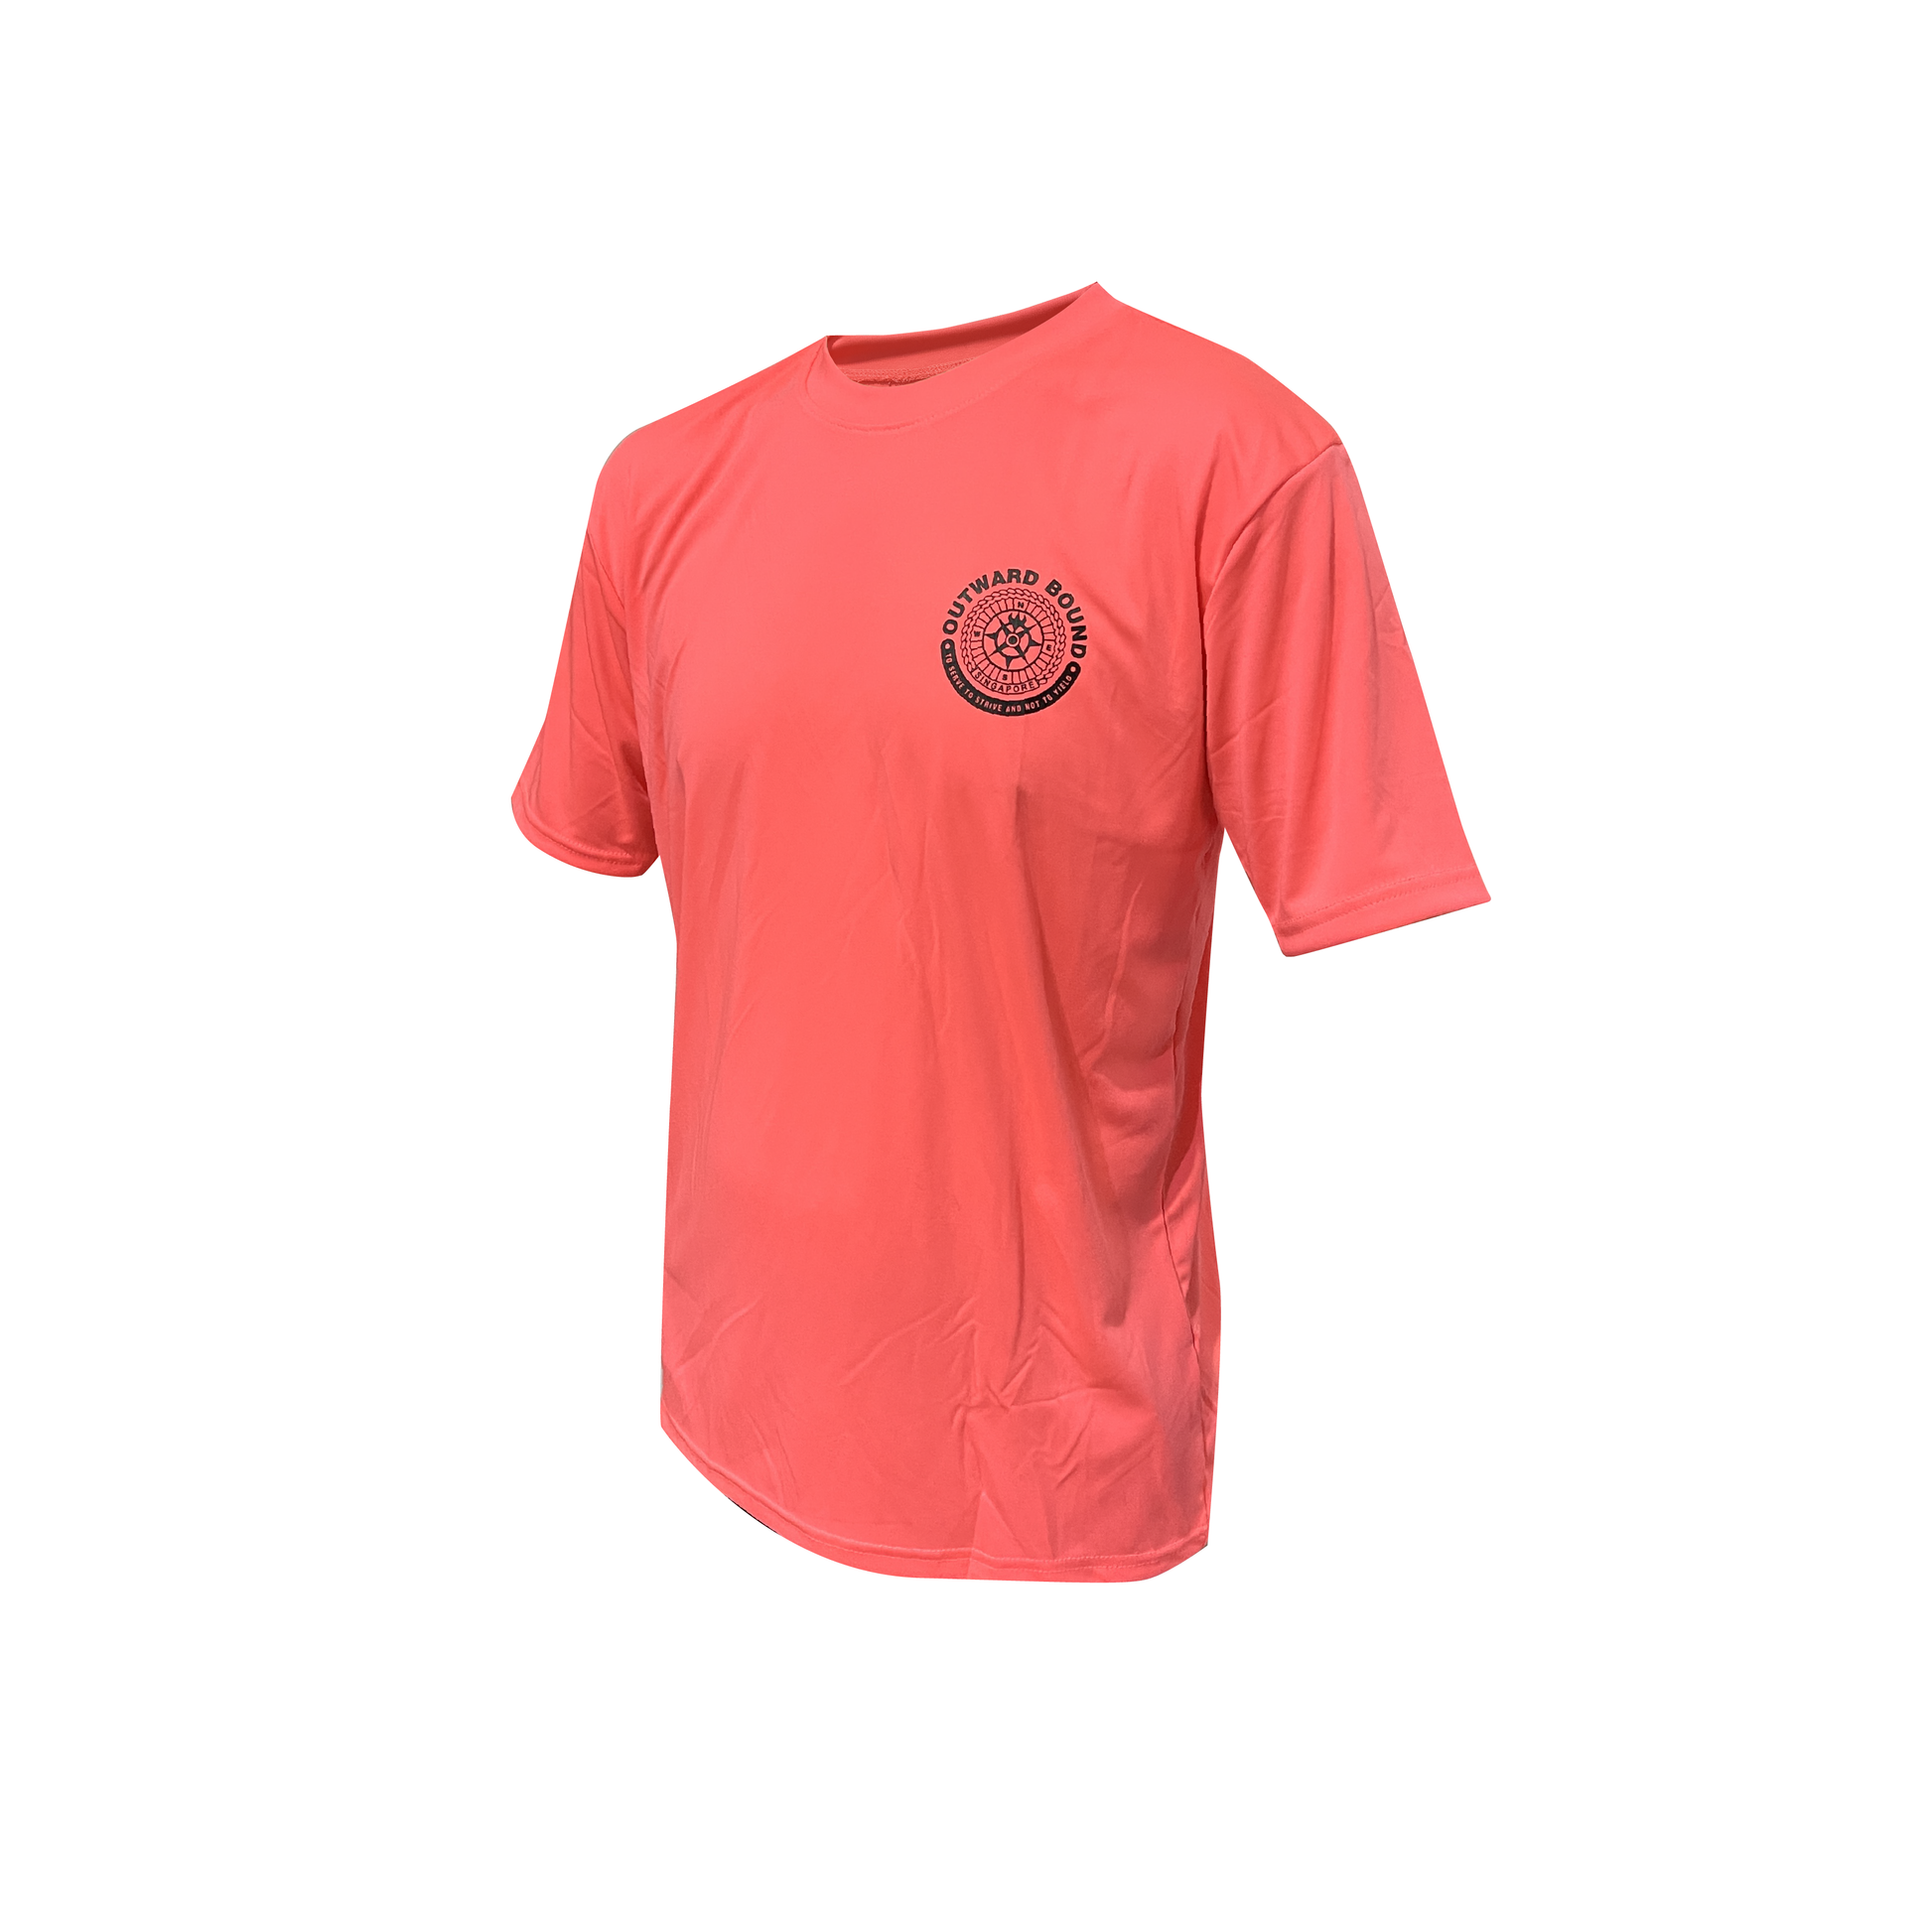 Neon Pink Classic Tee – Outward Bound Shop